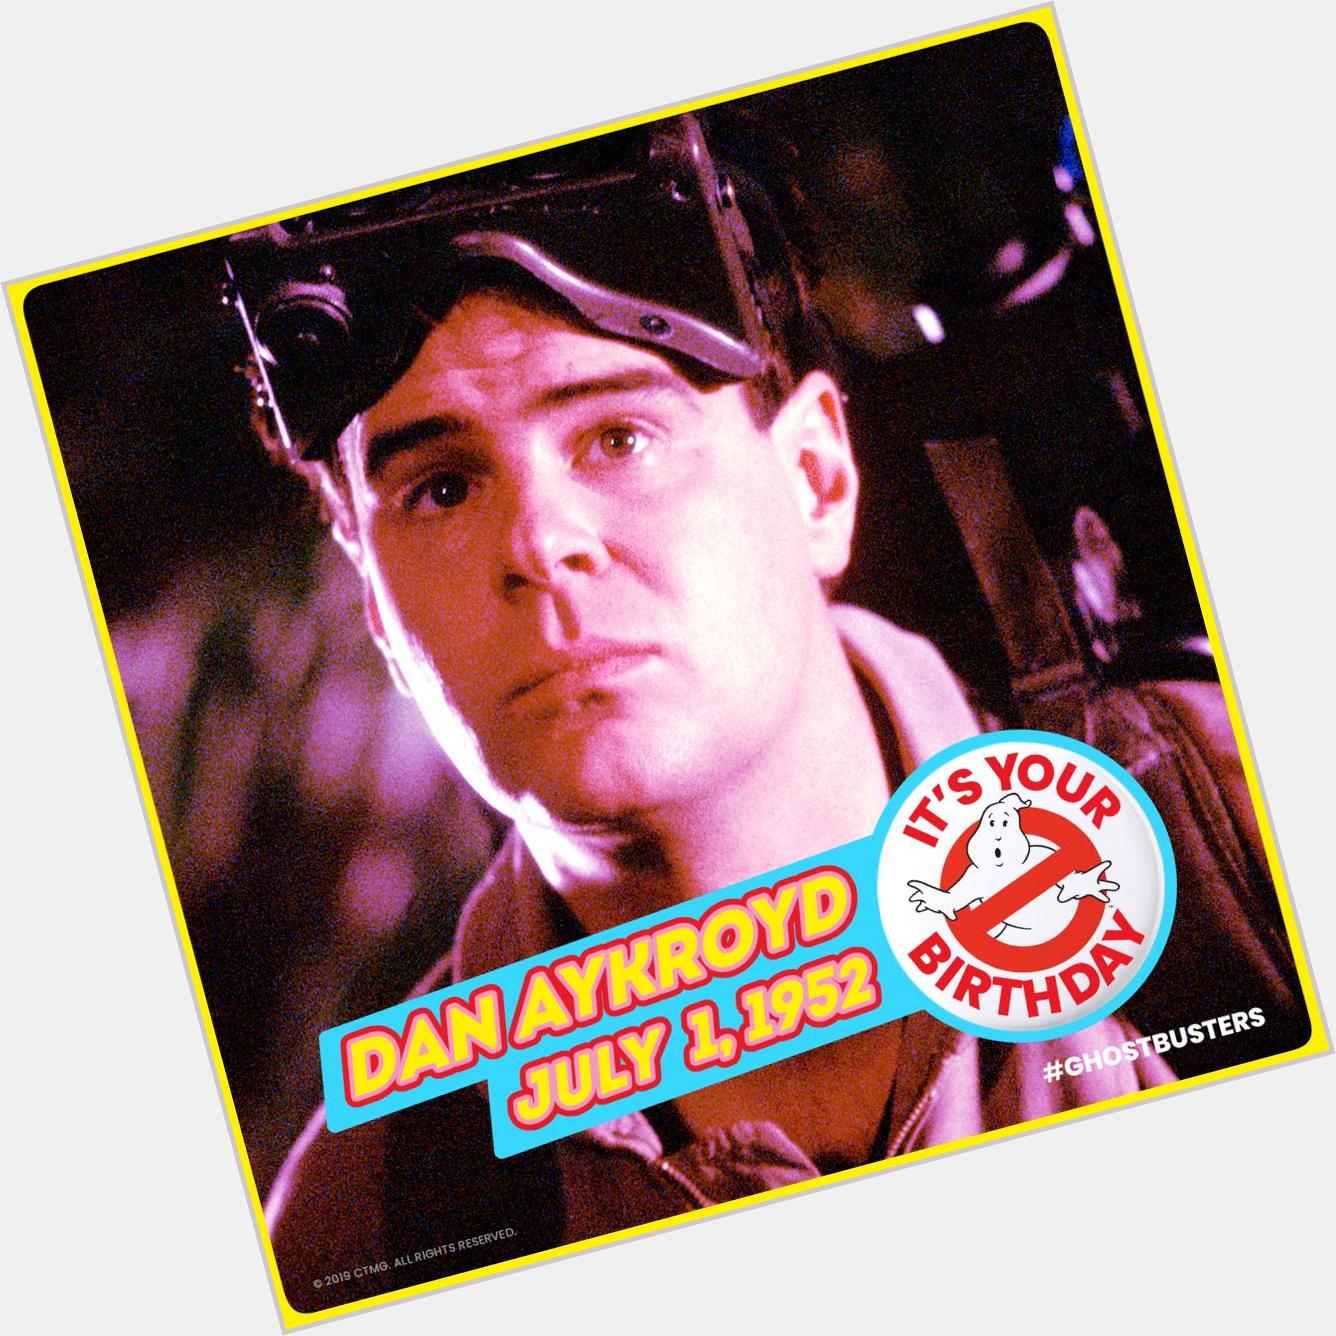 Wishing a happy birthday to the original Ghostbuster, 